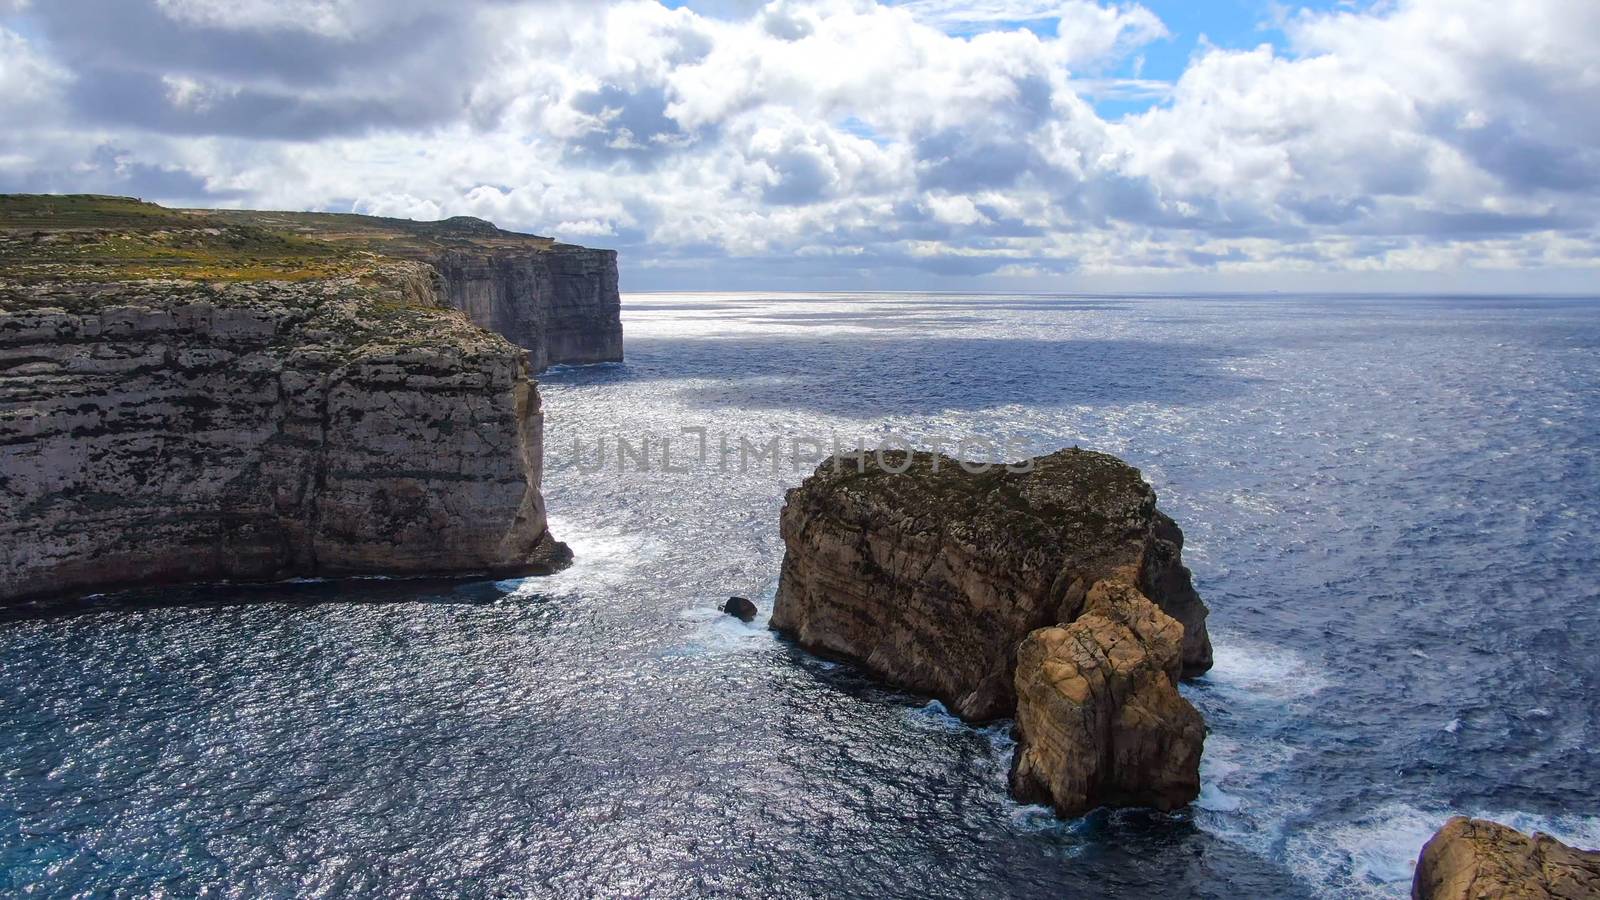 The remains of Azure Window at Dwerja Bay at the coast of Gozo Malta - aerial photography